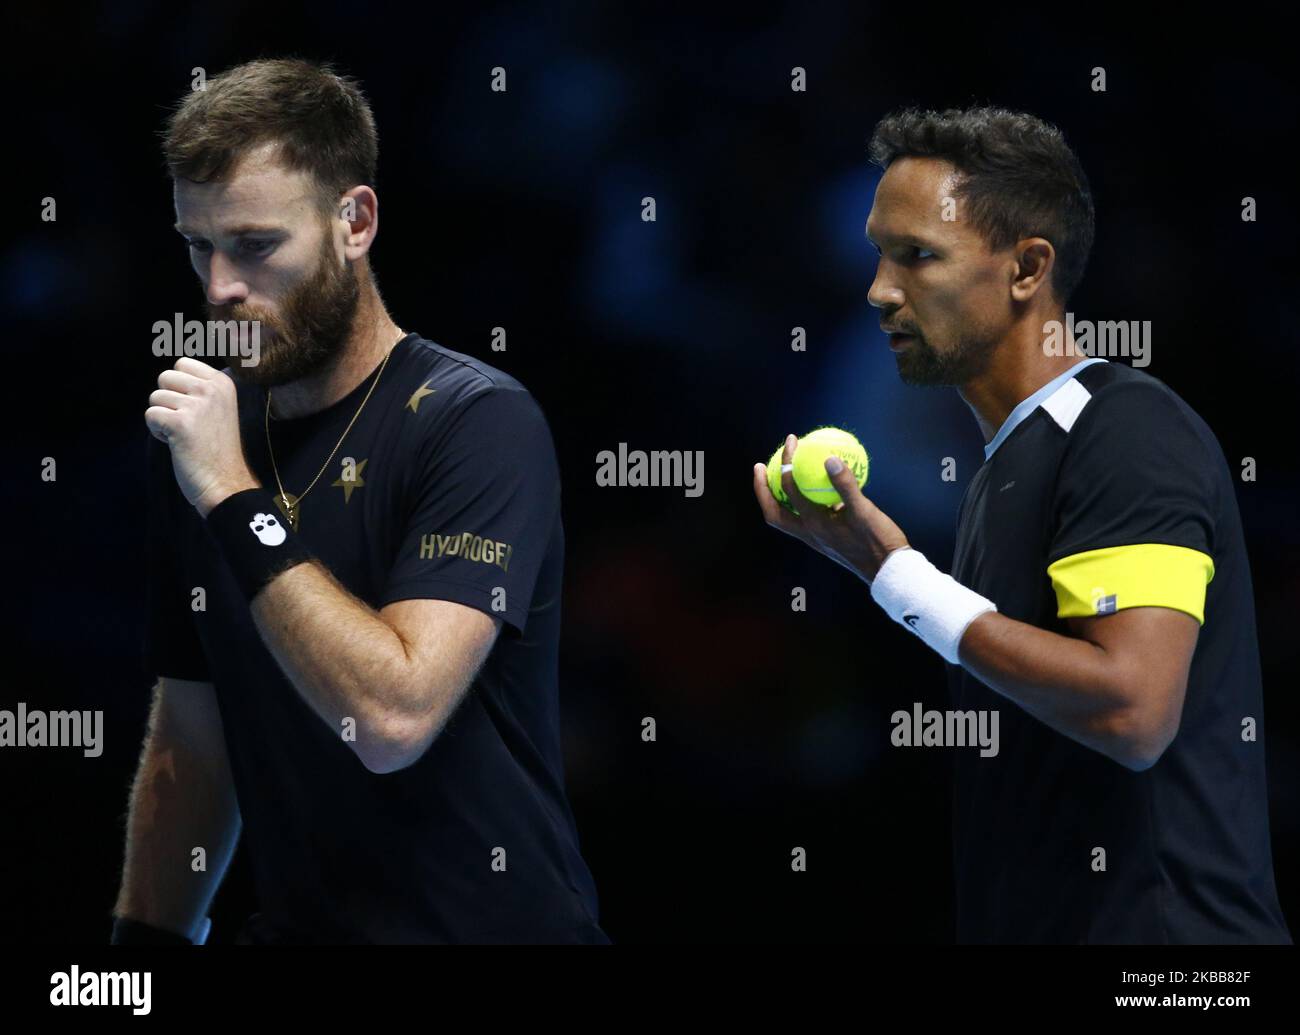 L-R Michael Venus (NZL) and Raven Klaasen (RSA) during Doubles Championship Semi-Final match Raven Klaasen (RSA) and Michael Venus (NZL) against Juan Sebastian Cabal and Robert Farah (COL) International Tennis - Nitto ATP World Tour Finals Day 7 - Tuesday 16th November 2019 - O2 Arena - London (Photo by Action Foto Sport/NurPhoto) Stock Photo